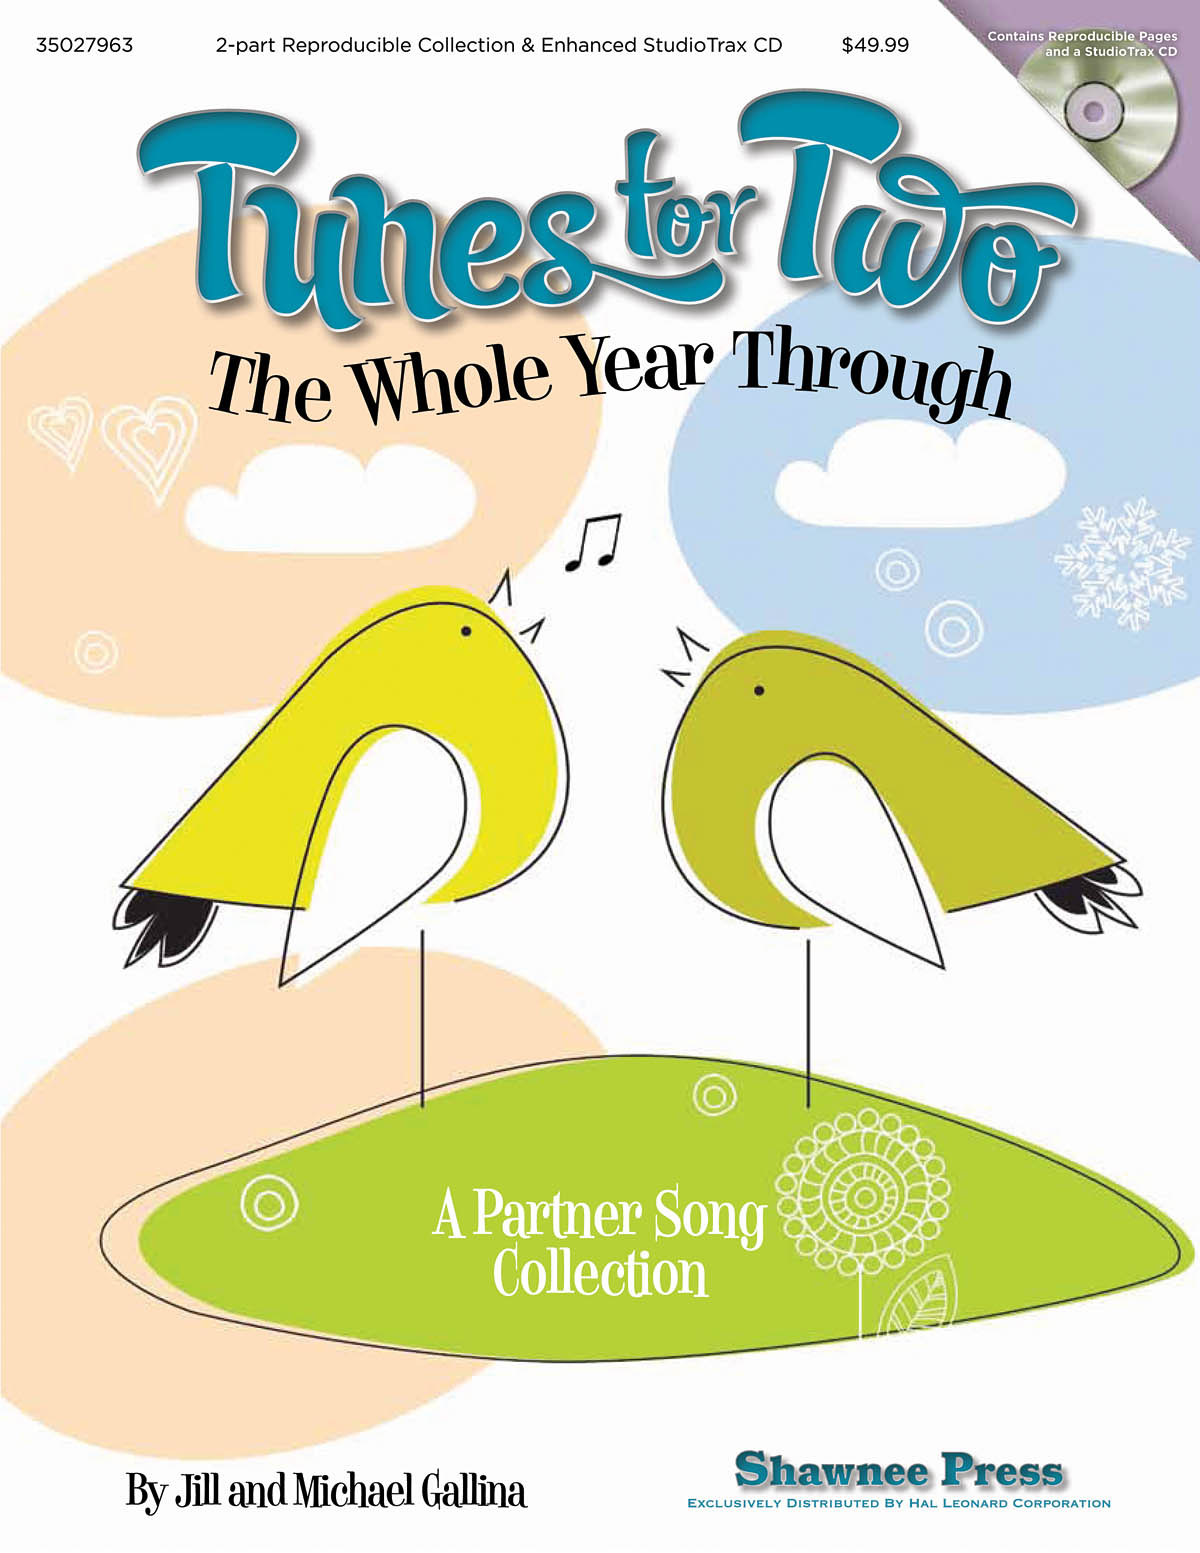 Jill Gallina Michael Gallina: Tunes for Two the Whole Year Through: Children's